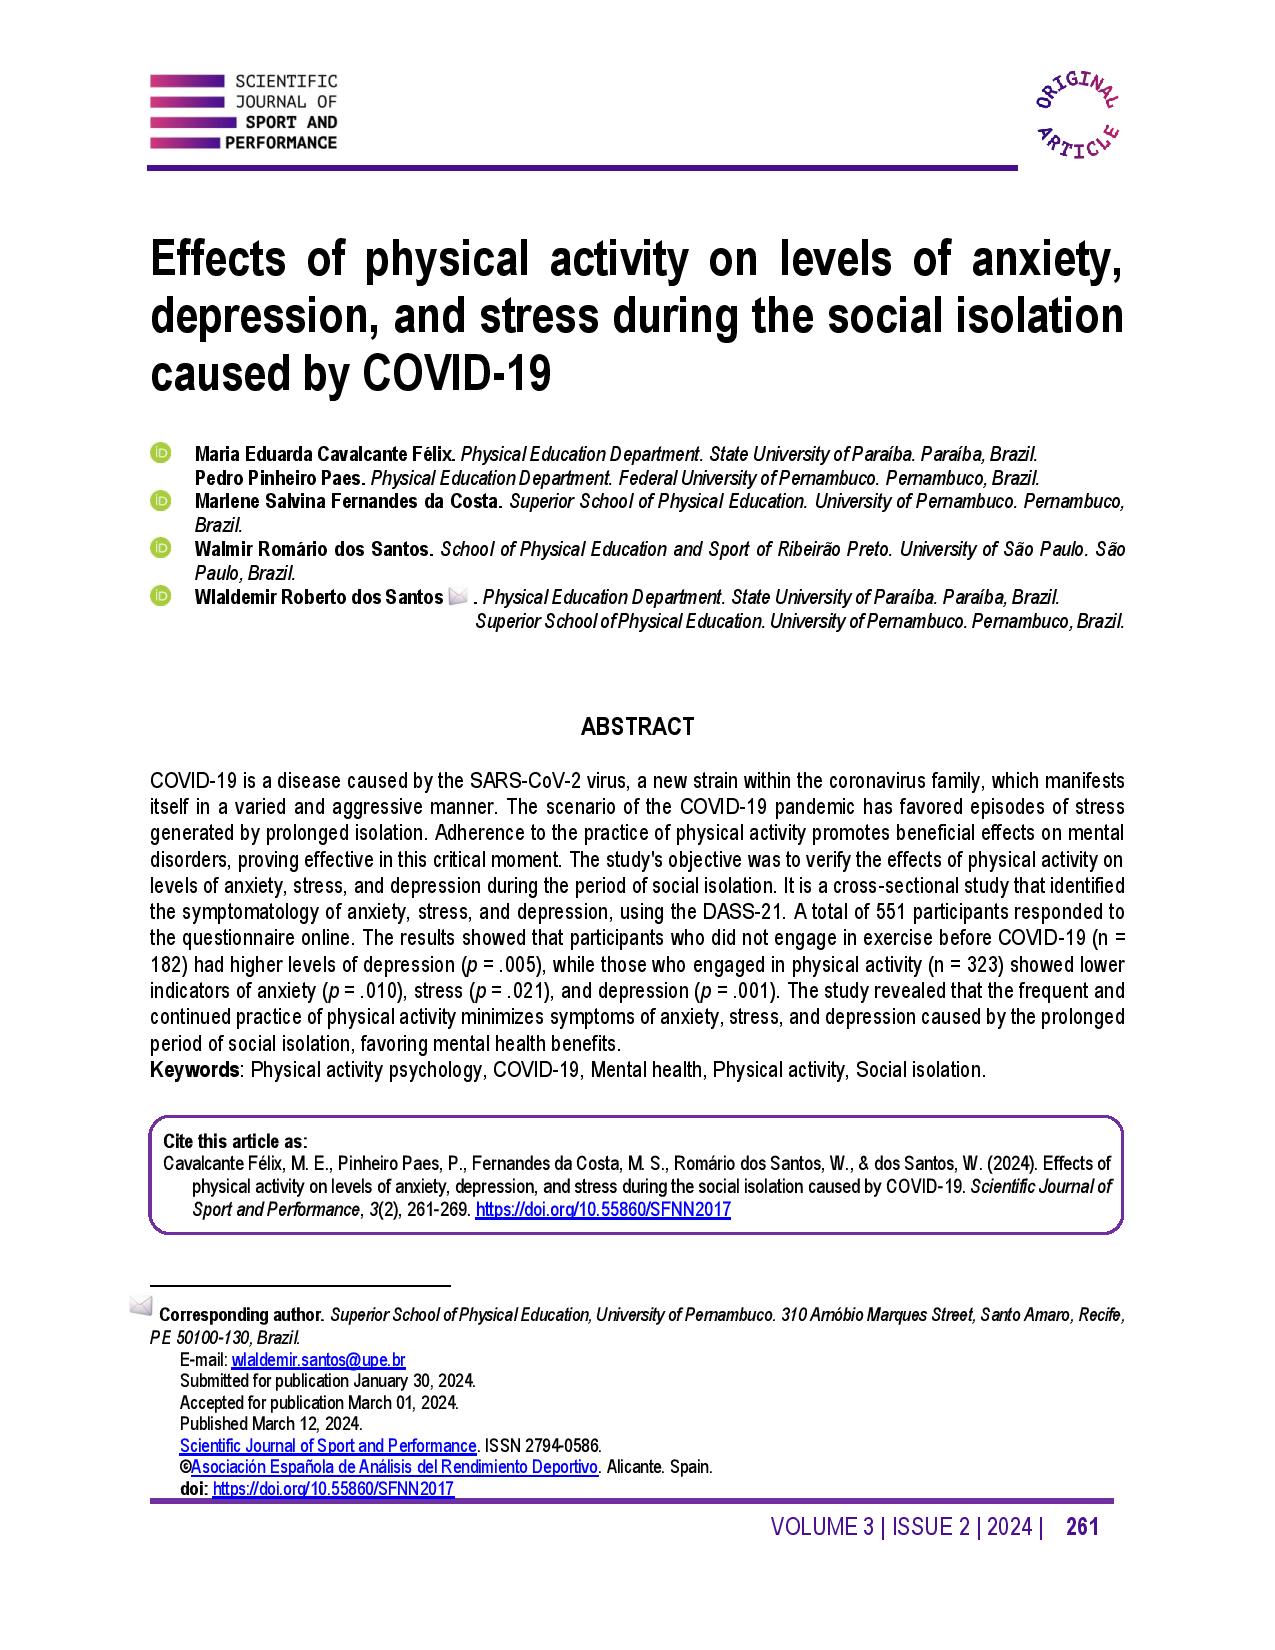 Effects of physical activity on levels of anxiety, depression, and stress during the social isolation caused by COVID-19